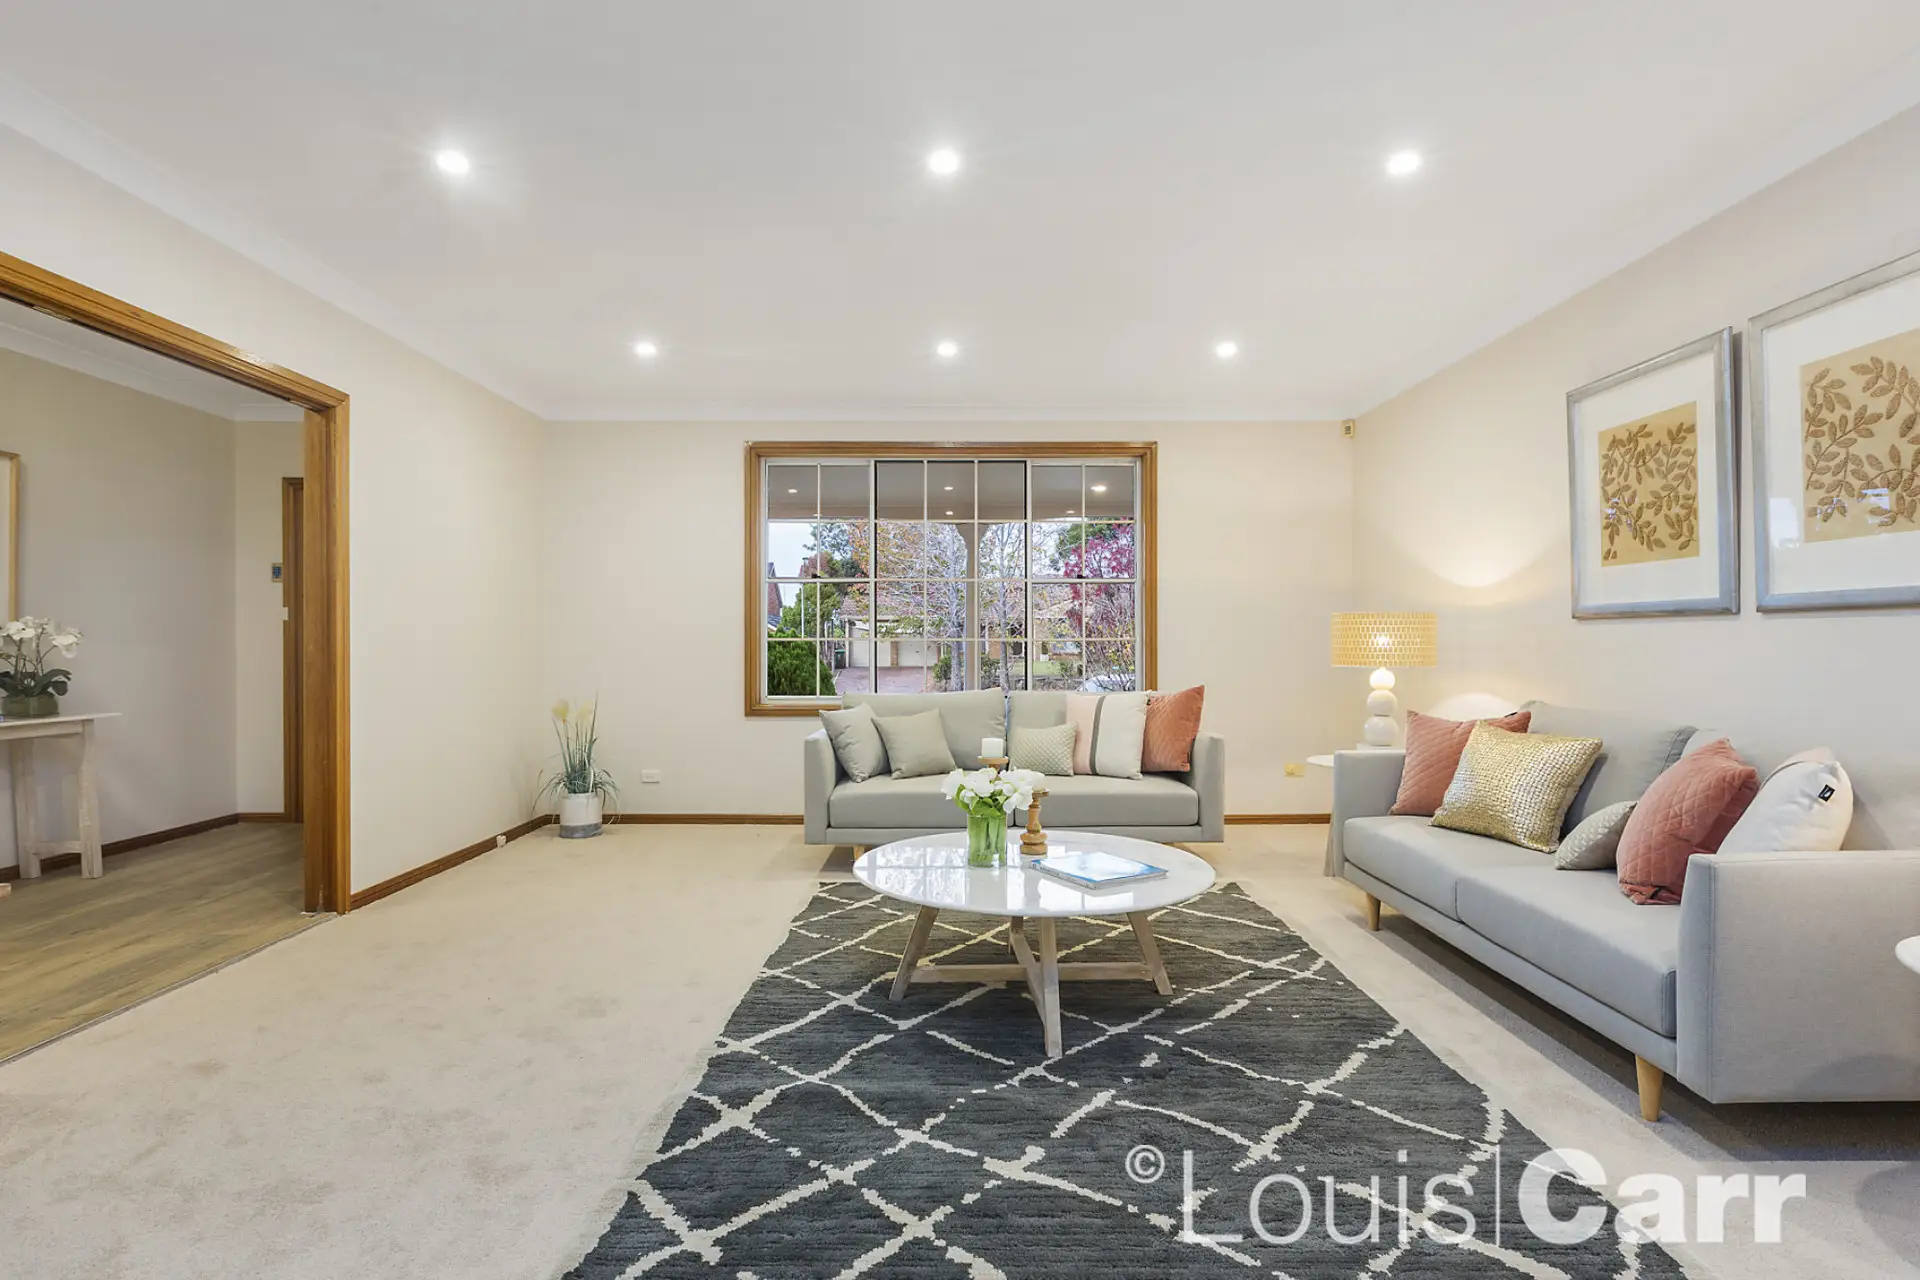 Photo #2: 20 Hibiscus Place, Cherrybrook - Sold by Louis Carr Real Estate